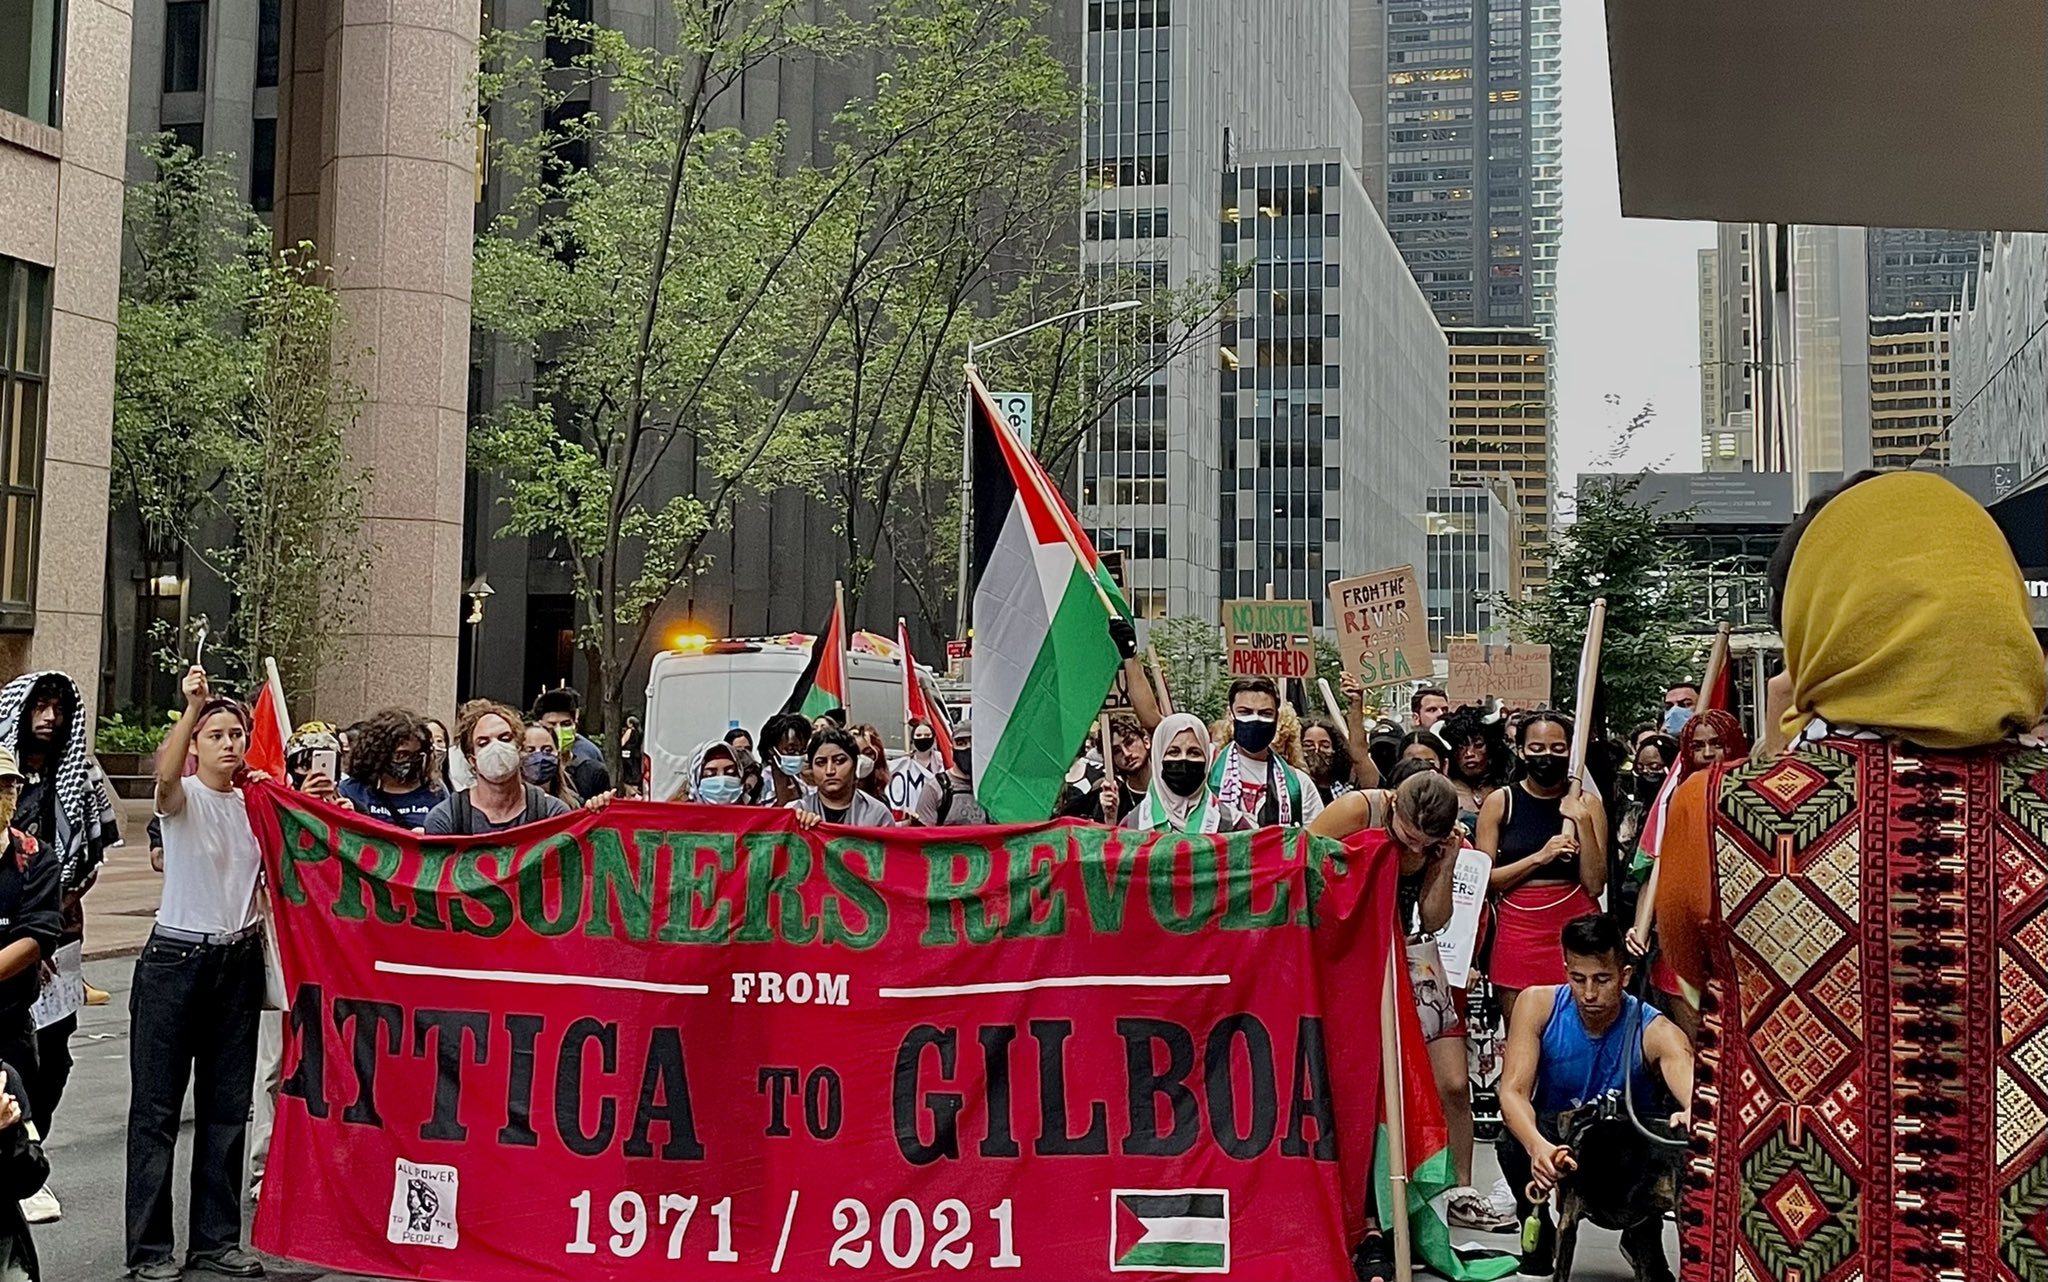 Protesters in New York wave Palestinian flag in support of 